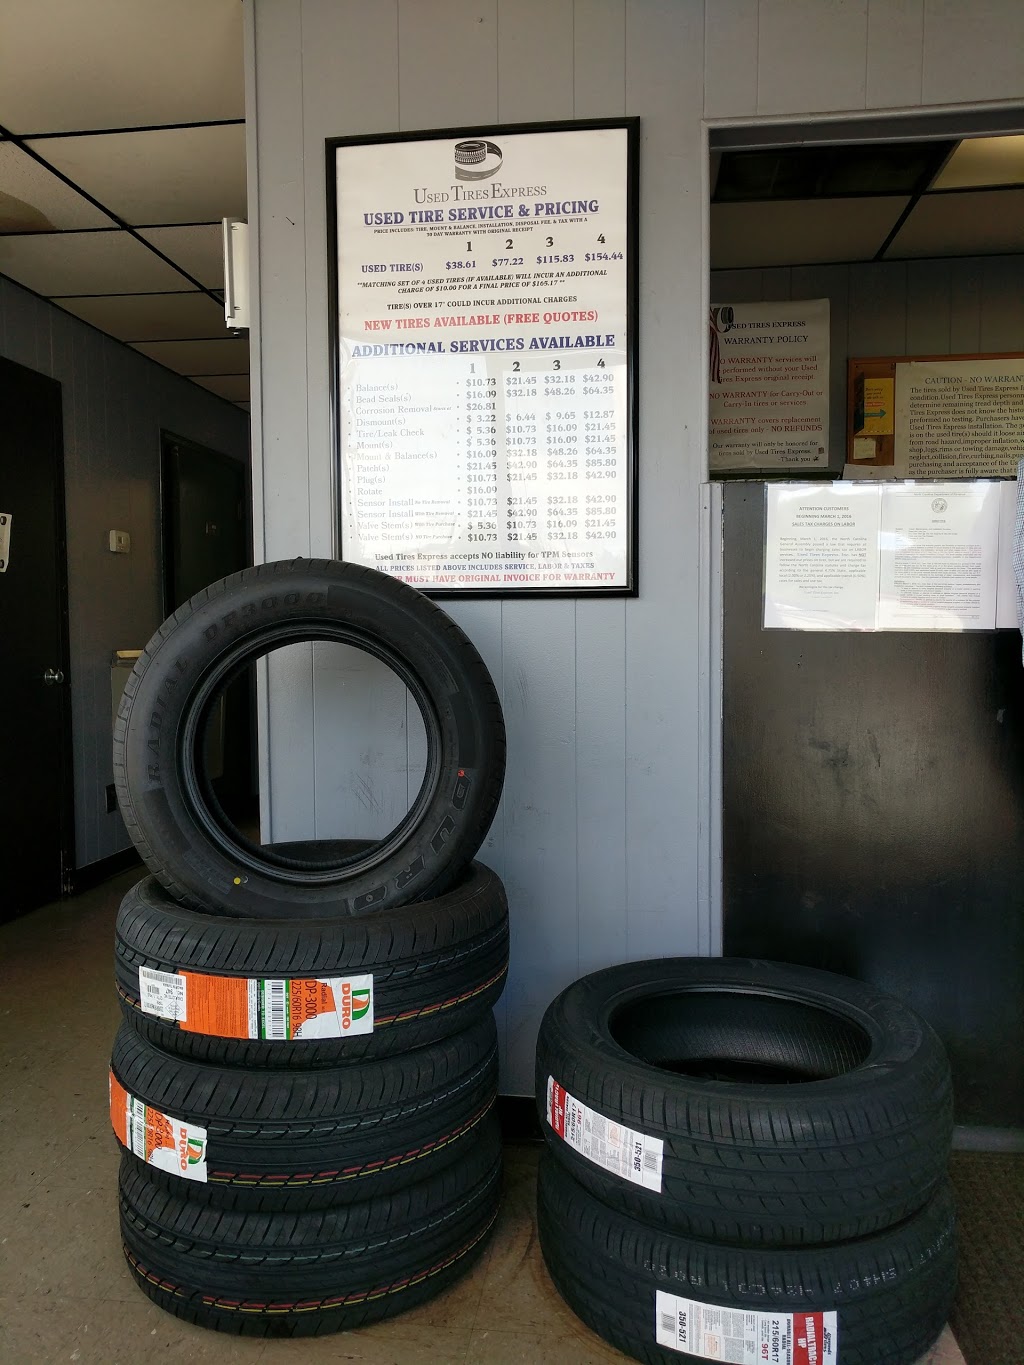 Used Tires Express | 4417 N Tryon St, Charlotte, NC 28213, USA | Phone: (704) 596-4000